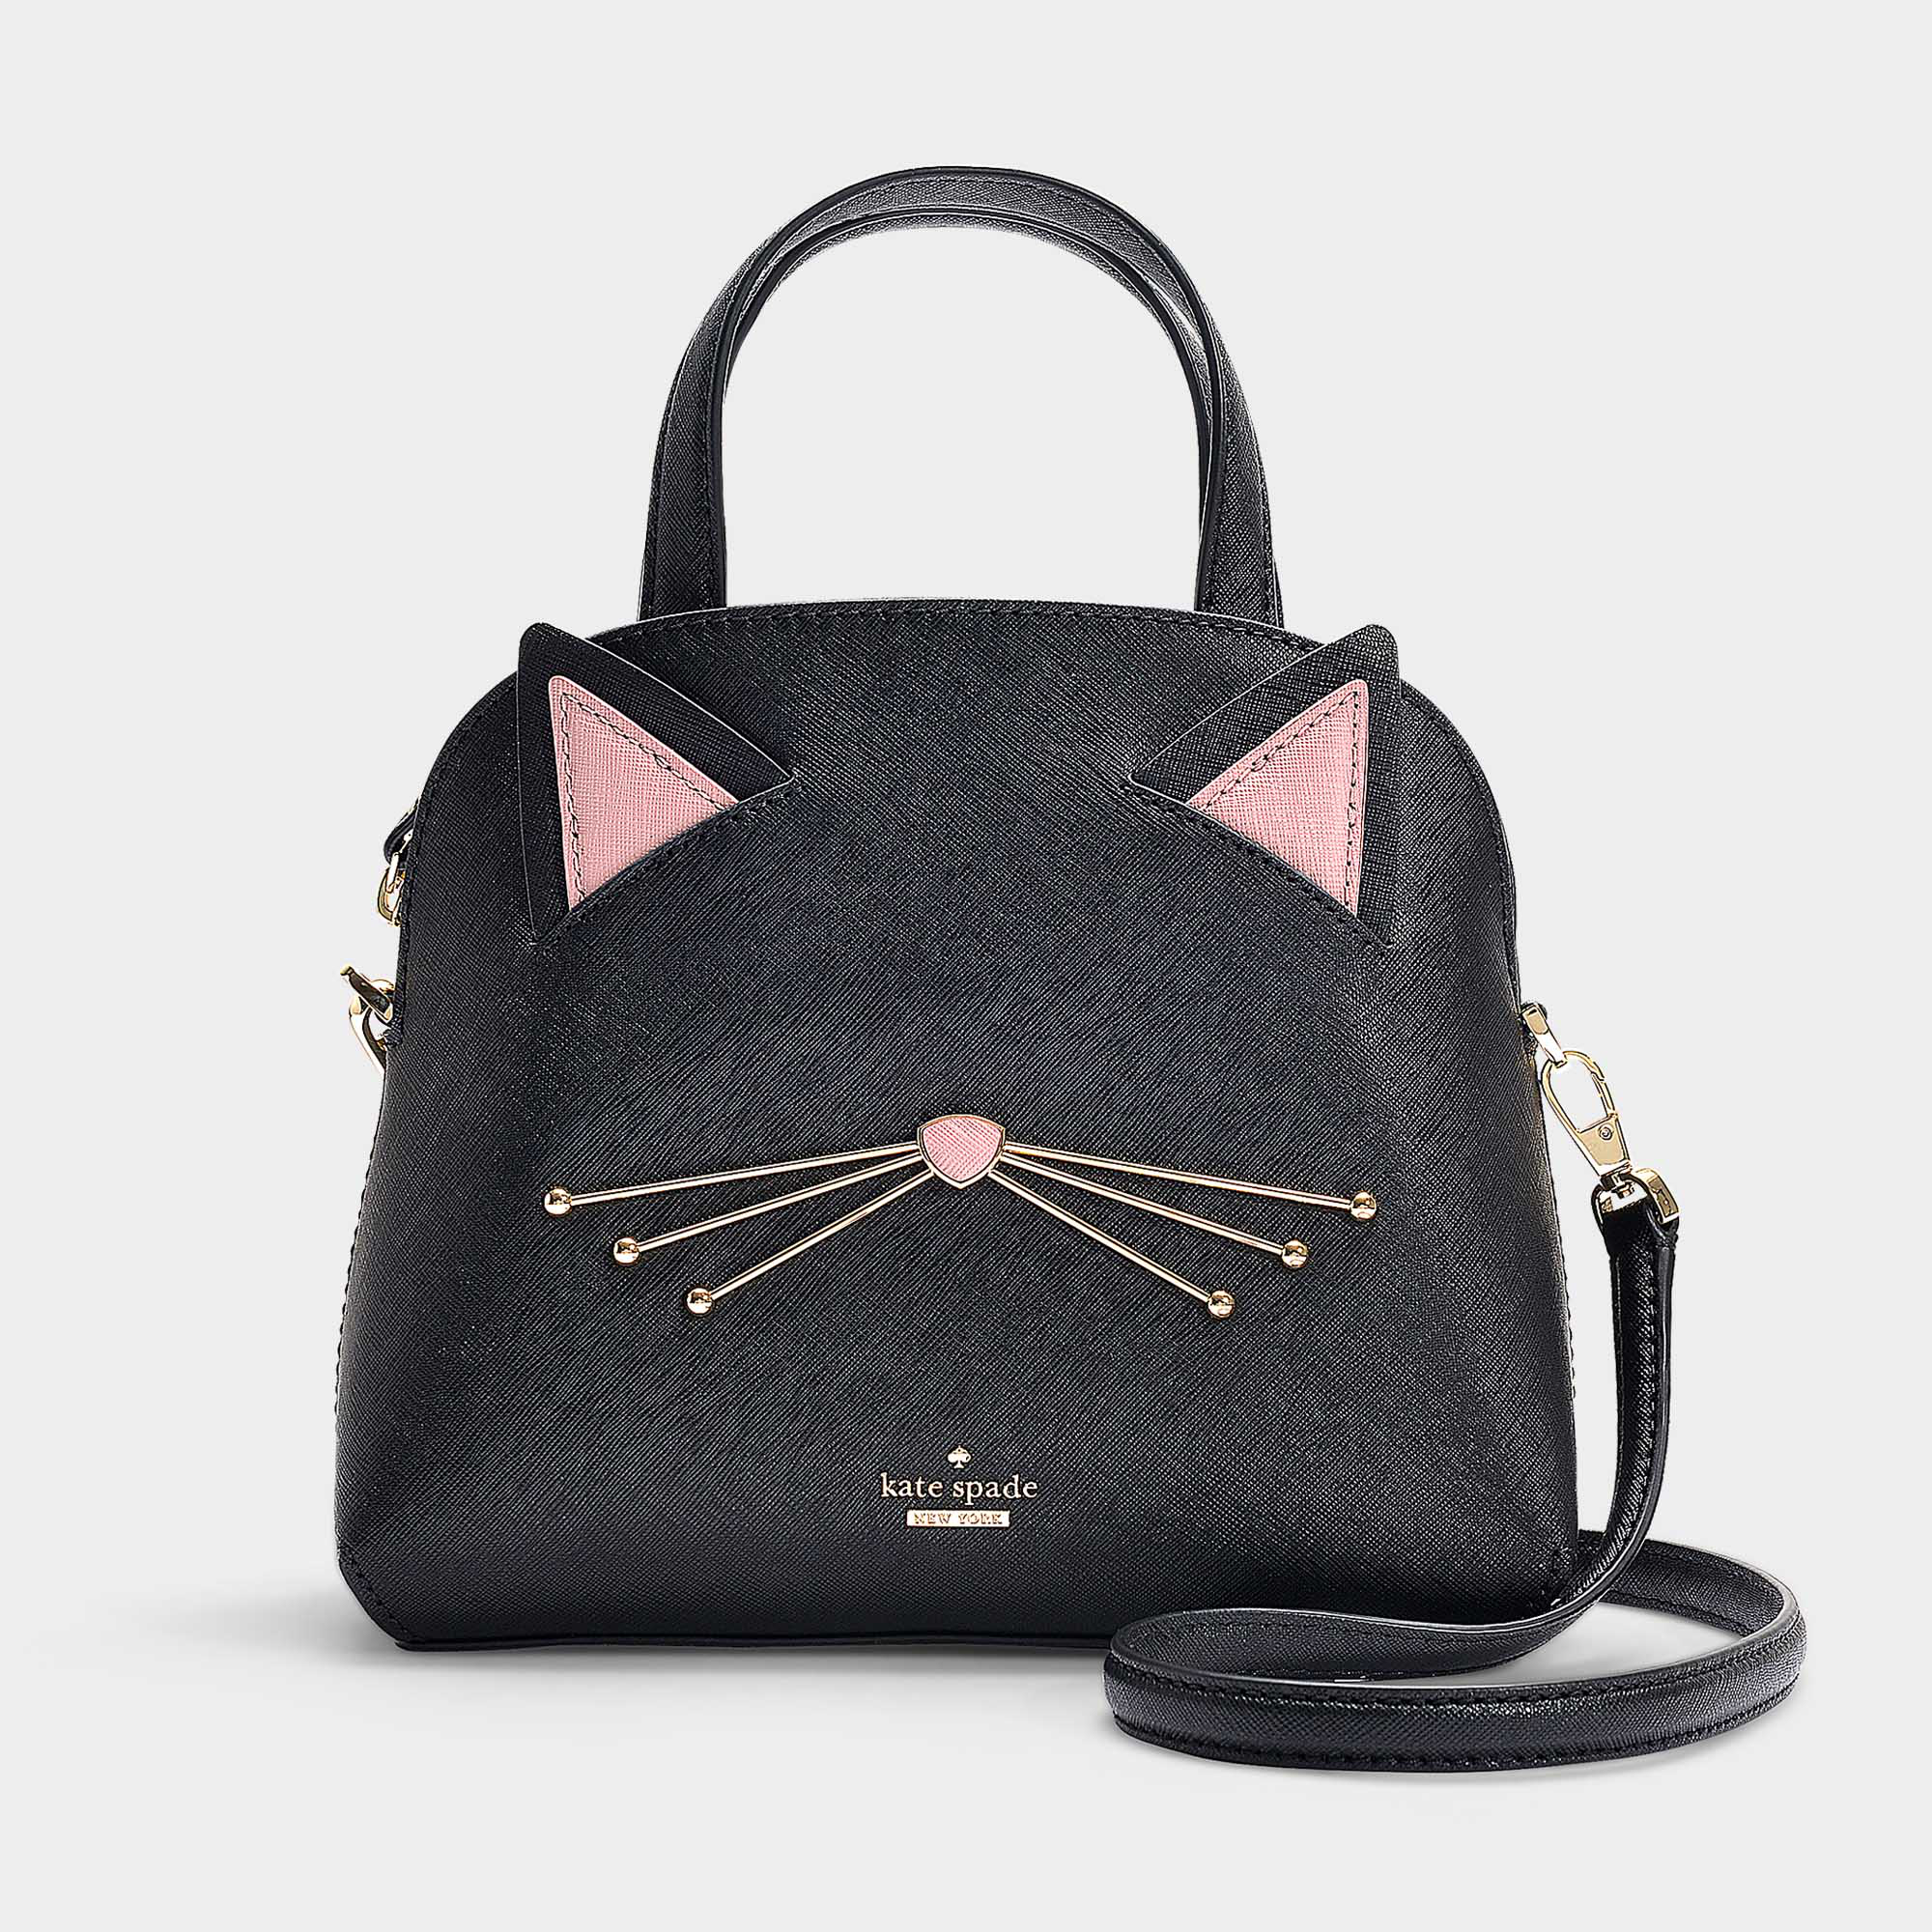 kate spade new york 'cat's meow' cat coin purse Nordstrom